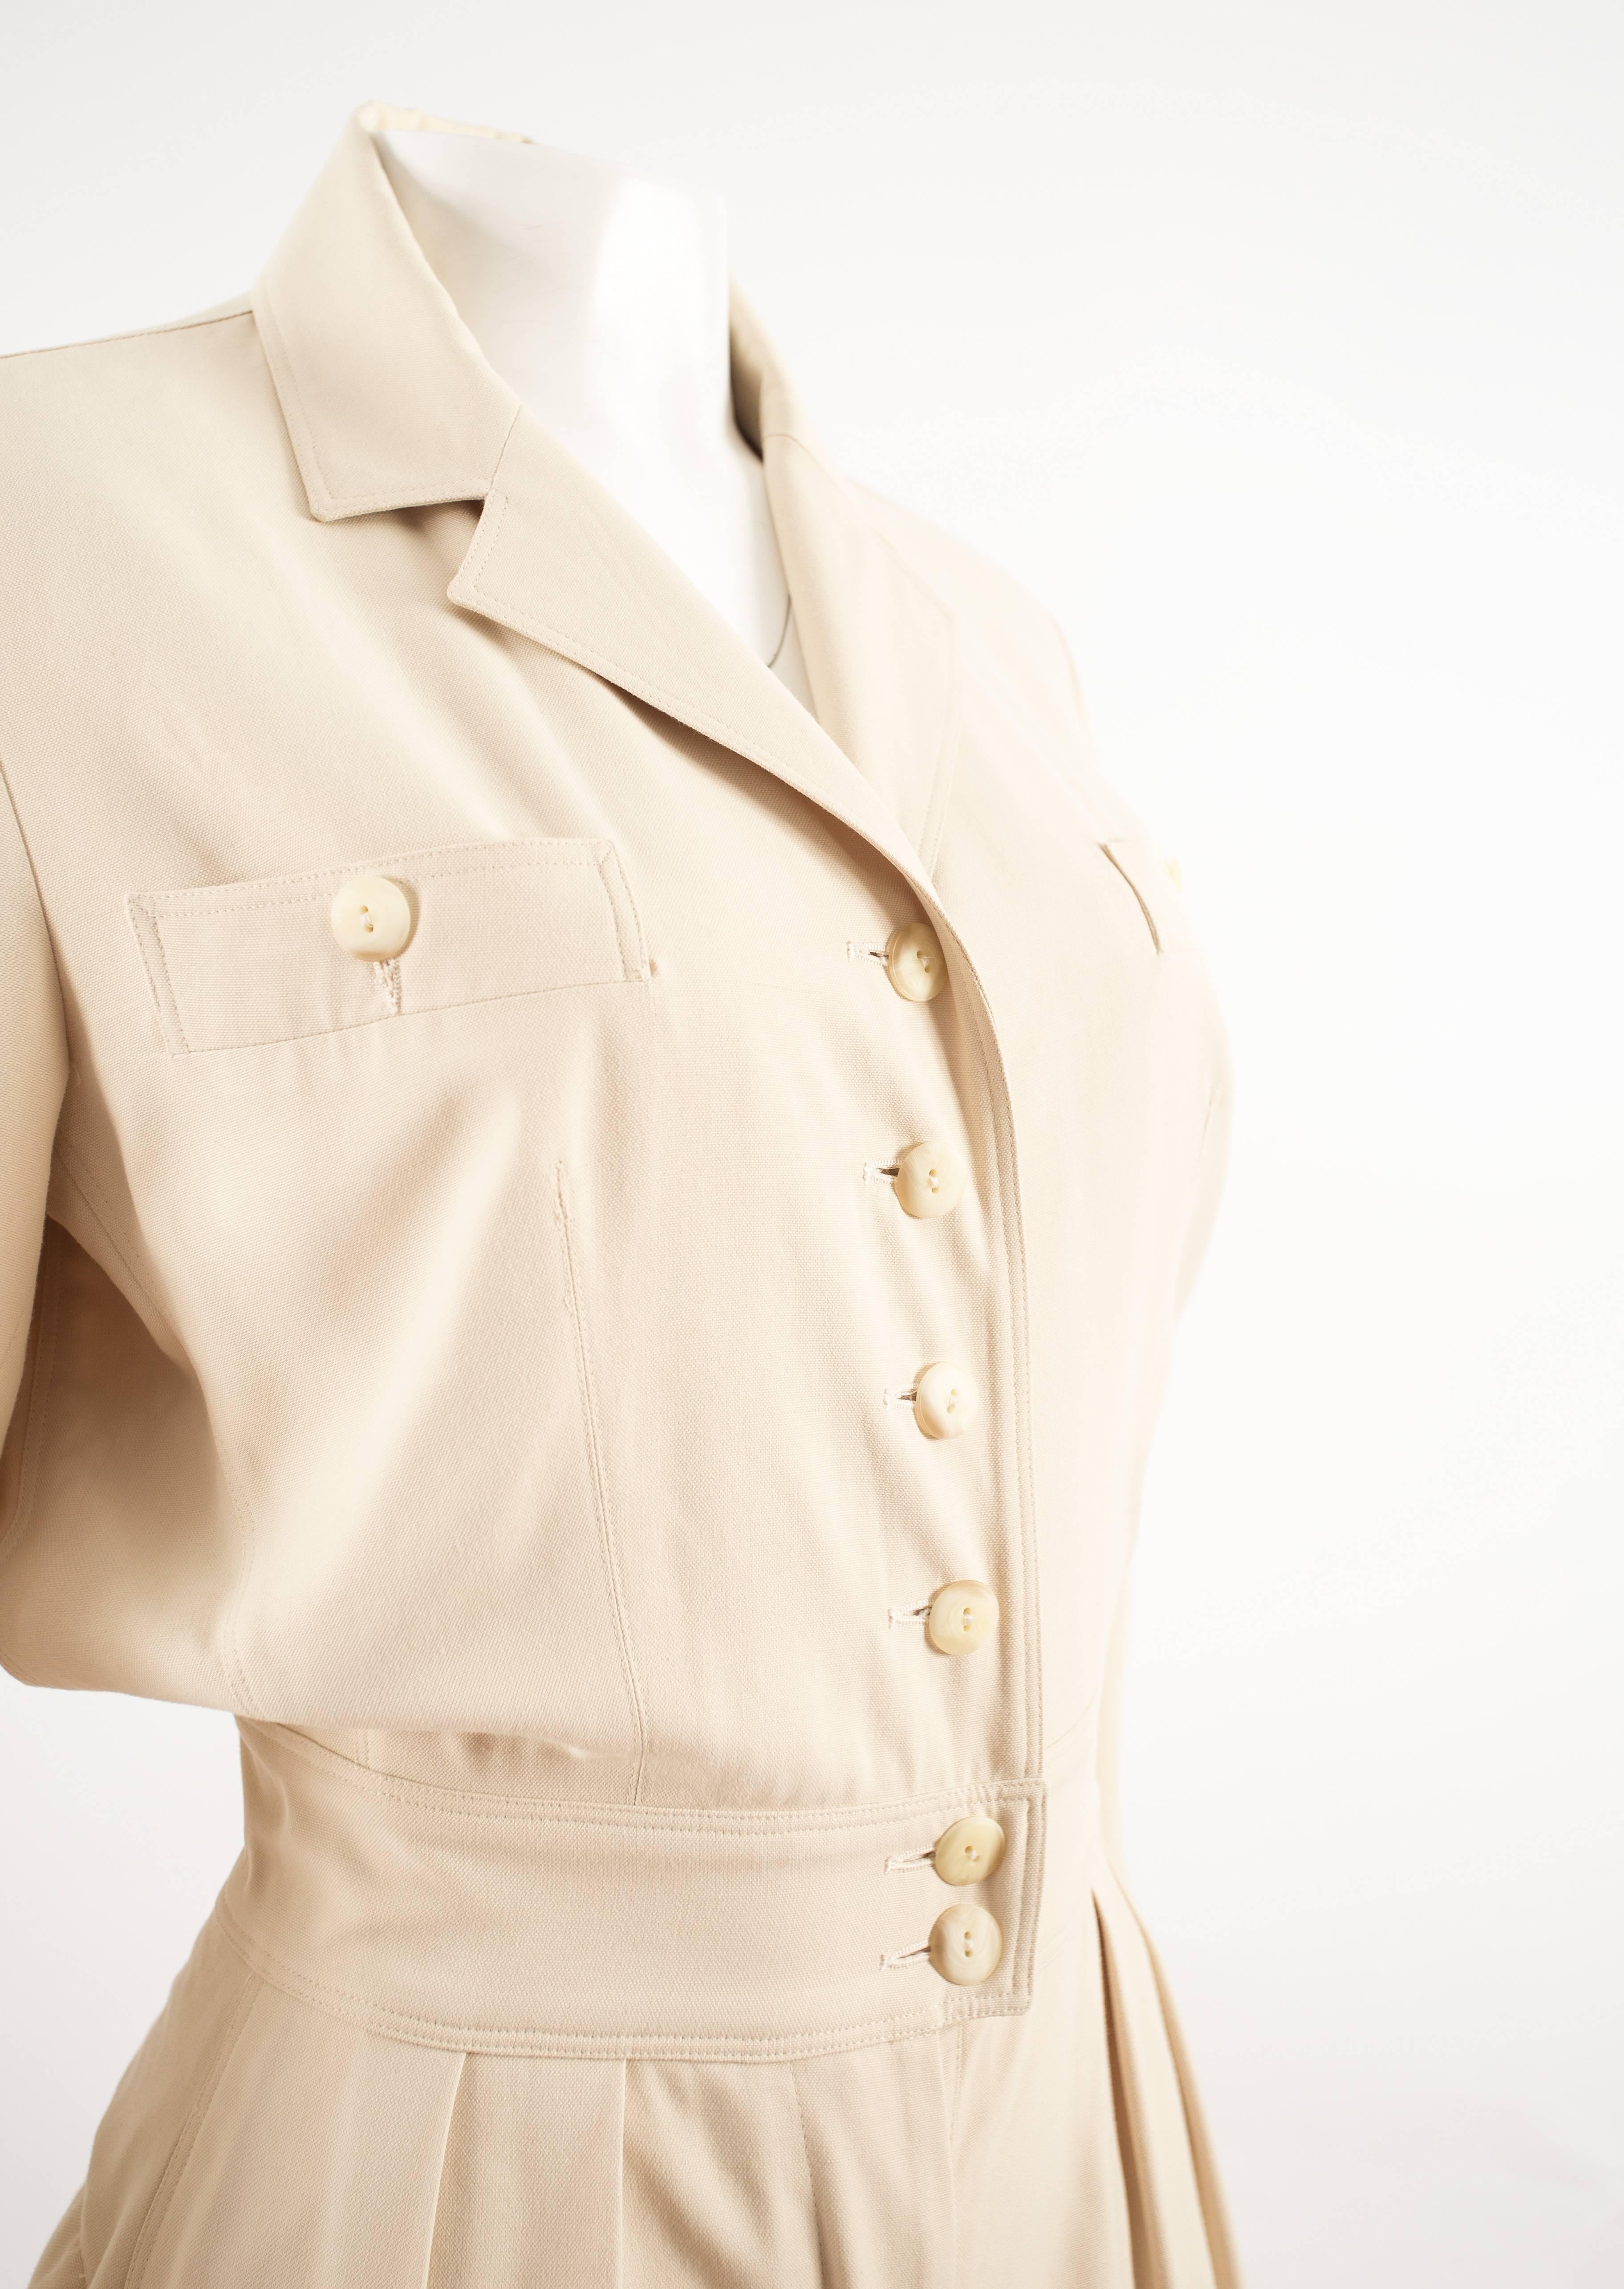 Alaia Spring-Summer 1988 cream cotton playsuit and jacket 

- playsuit with notched lapel, wide sleeves, shoulder pads, high waist pleated mini shorts and button closures

- oversized jacket with attached belt fastening, large open pockets, shoulder